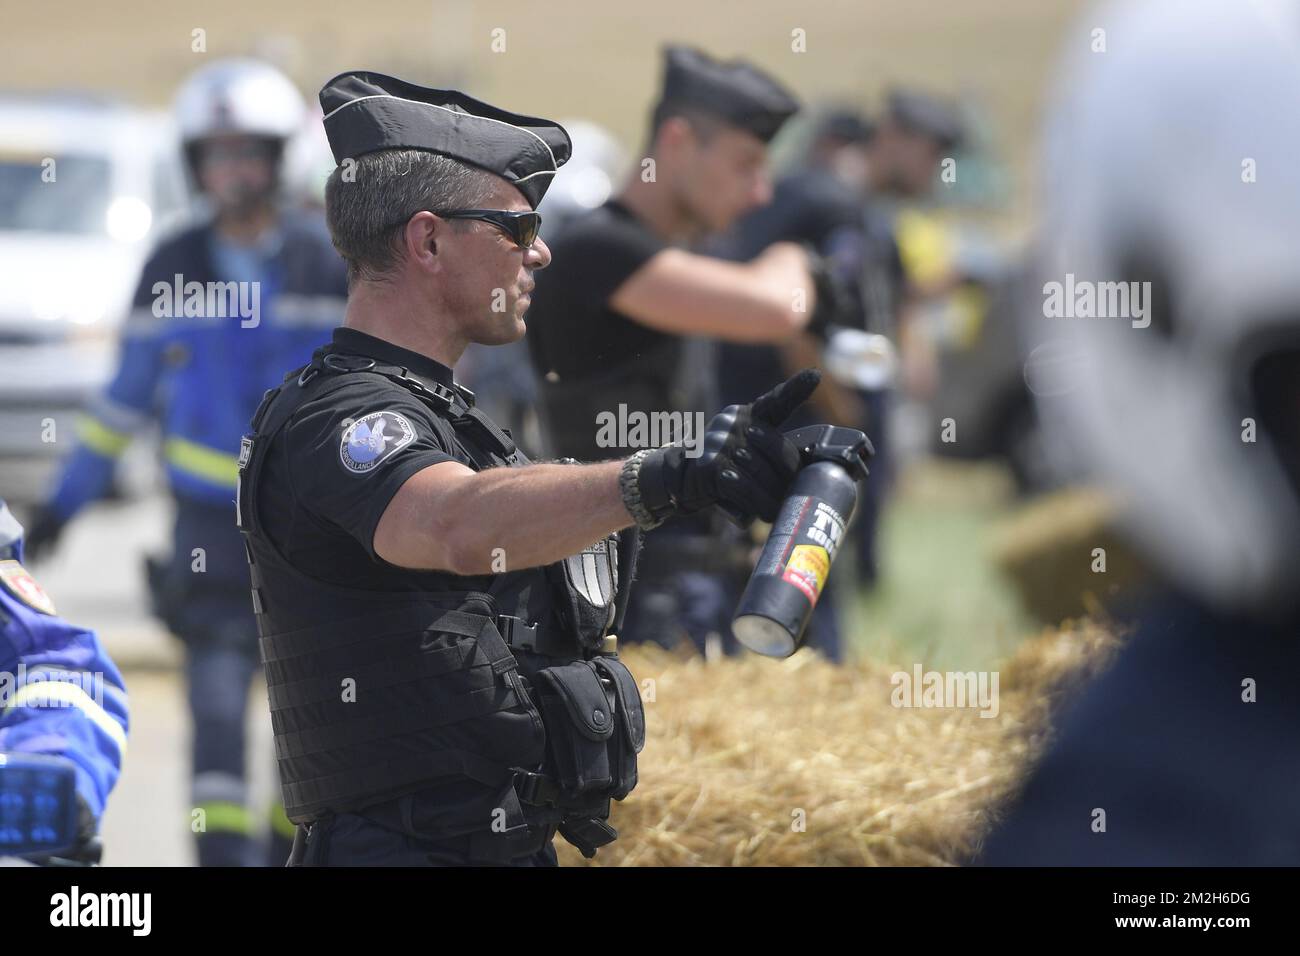 A police man holds a cannister of tear gas (pepper spray - traangas - lacrymogene) during a protest action, in the 16th stage of the 105th edition of the Tour de France cycling race, 218km from Carcassone to Bagneres-de-Luchon, France, Tuesday 24 July 2018. This year's Tour de France takes place from July 7th to July 29th. BELGA PHOTO YORICK JANSENS - FRANCE OUT  Stock Photo